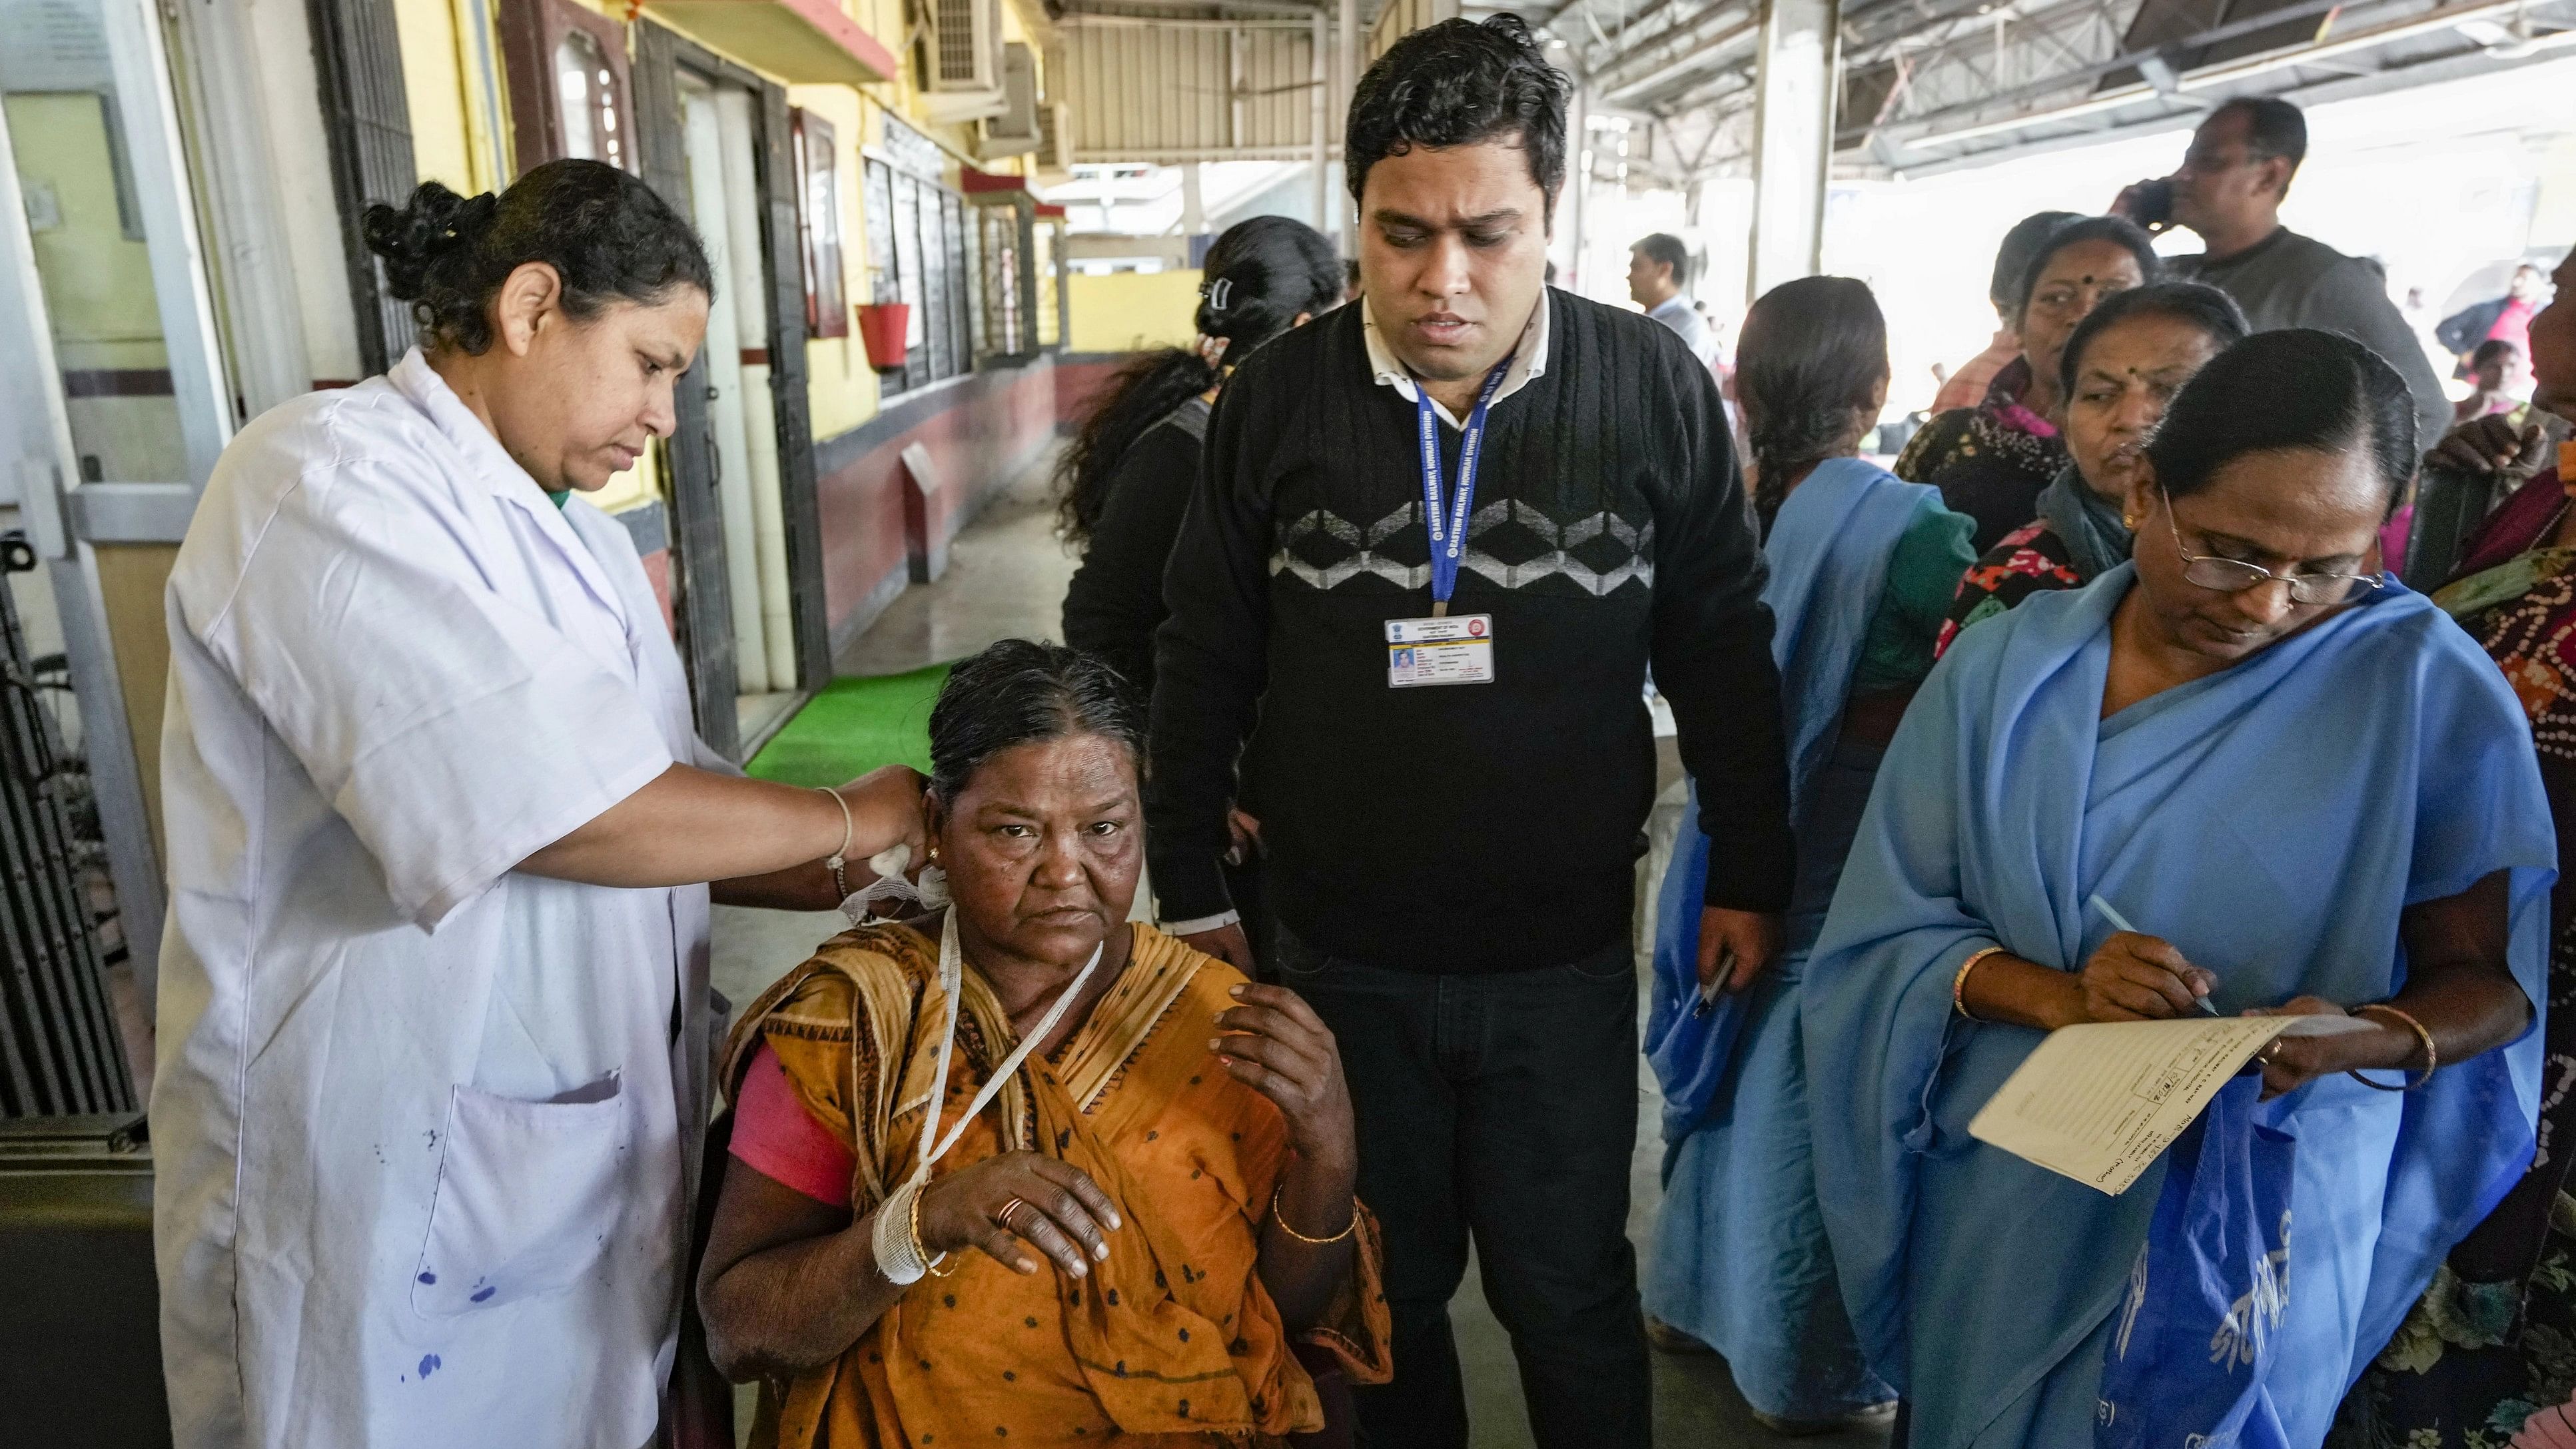 <div class="paragraphs"><p>An injured passenger undergoes treatment after a large overhead water tank fell on passengers waiting on a platform of Bardhaman railway station, in Bardhaman, West Bengal.</p></div>